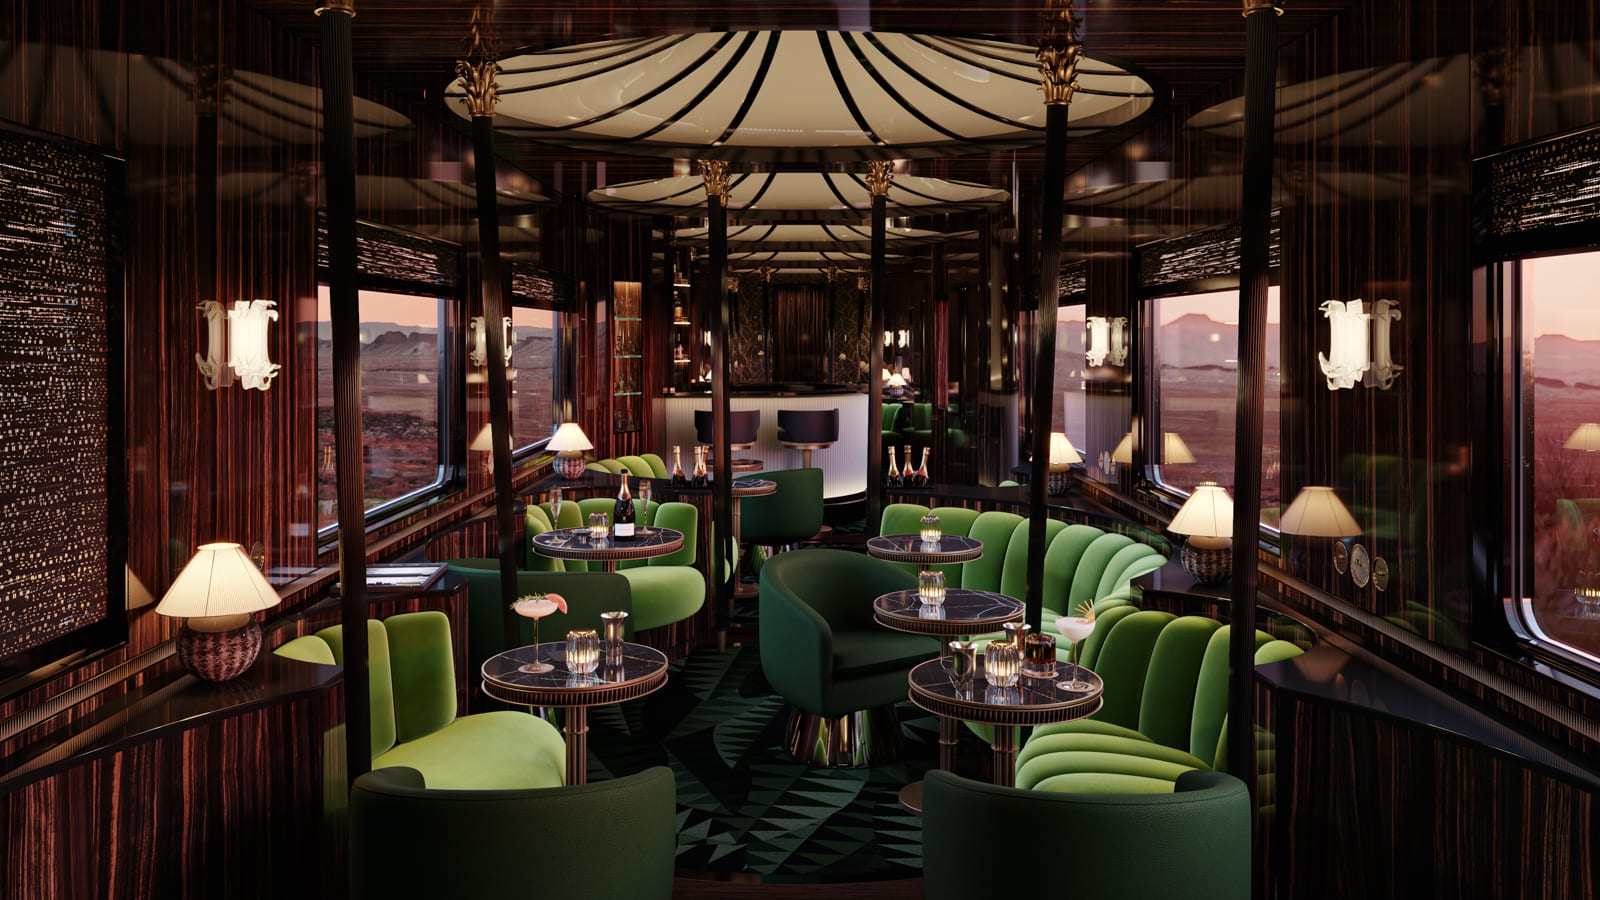 Interiors of the revamped Orient Express revealed 